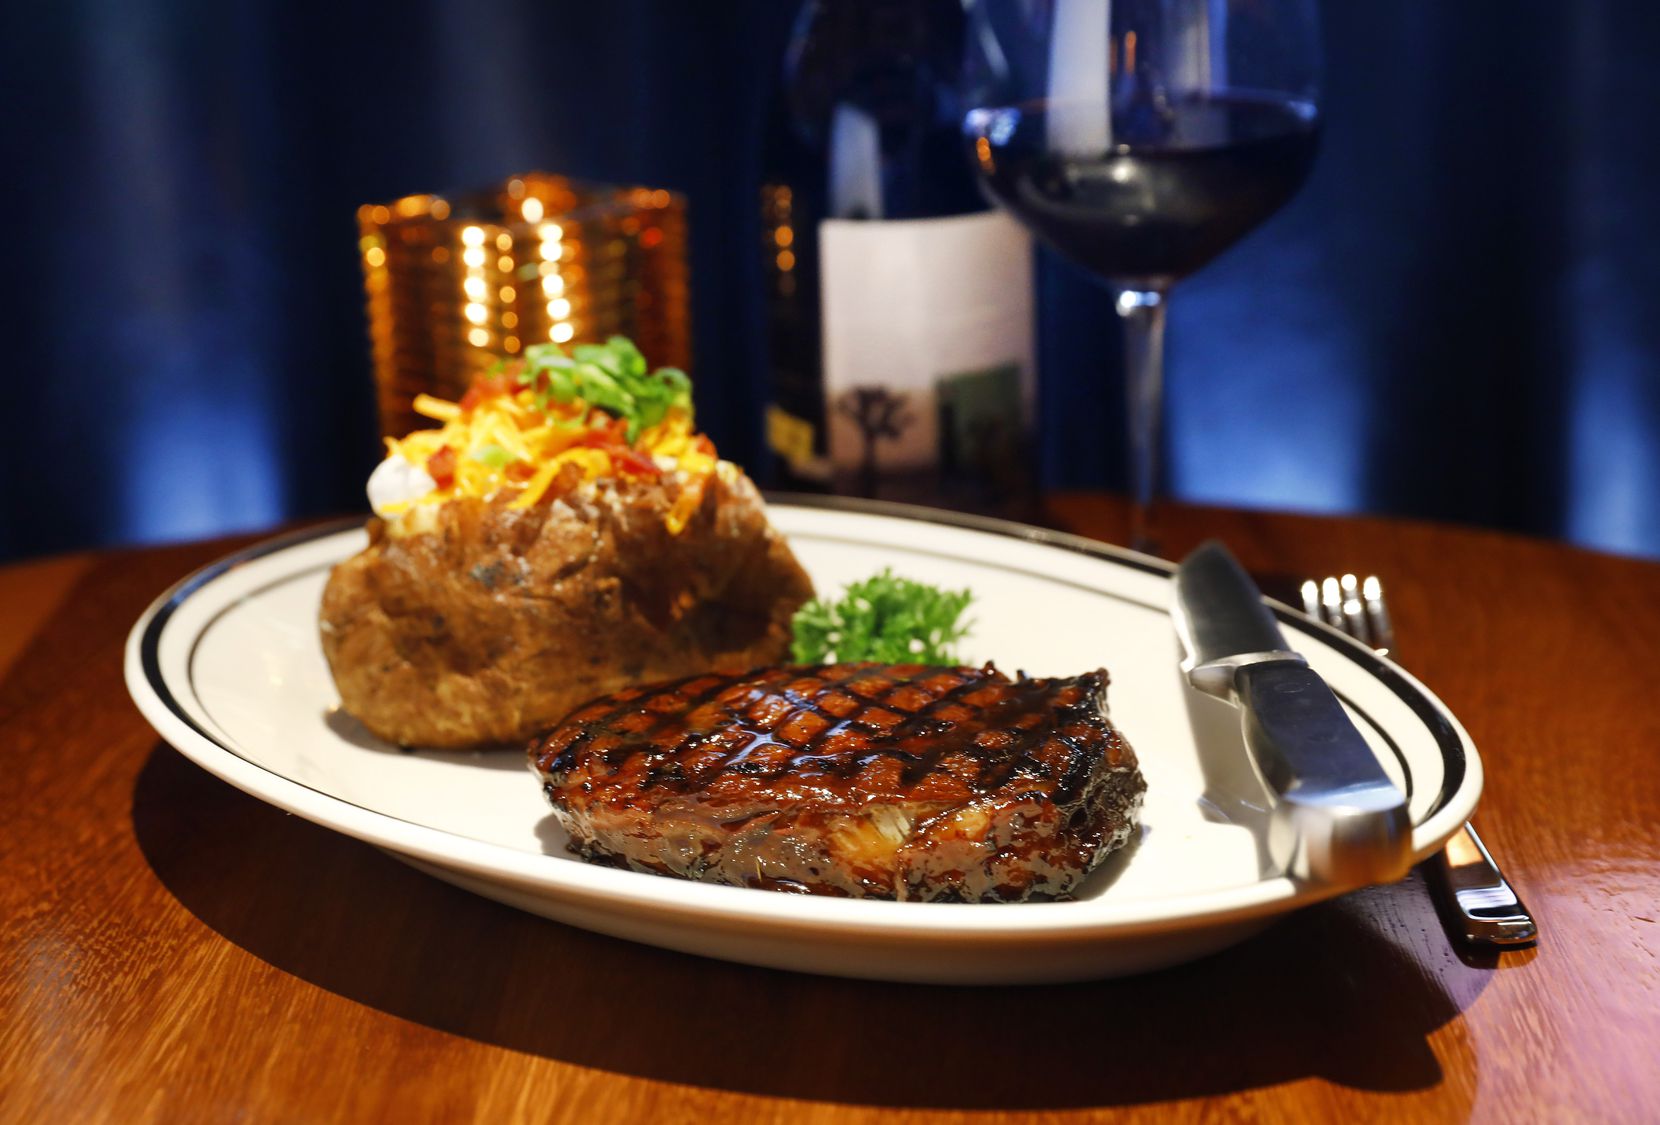 The San Francisco rib-eye at Brentwood comes with a baked potato, a throwback side that is...